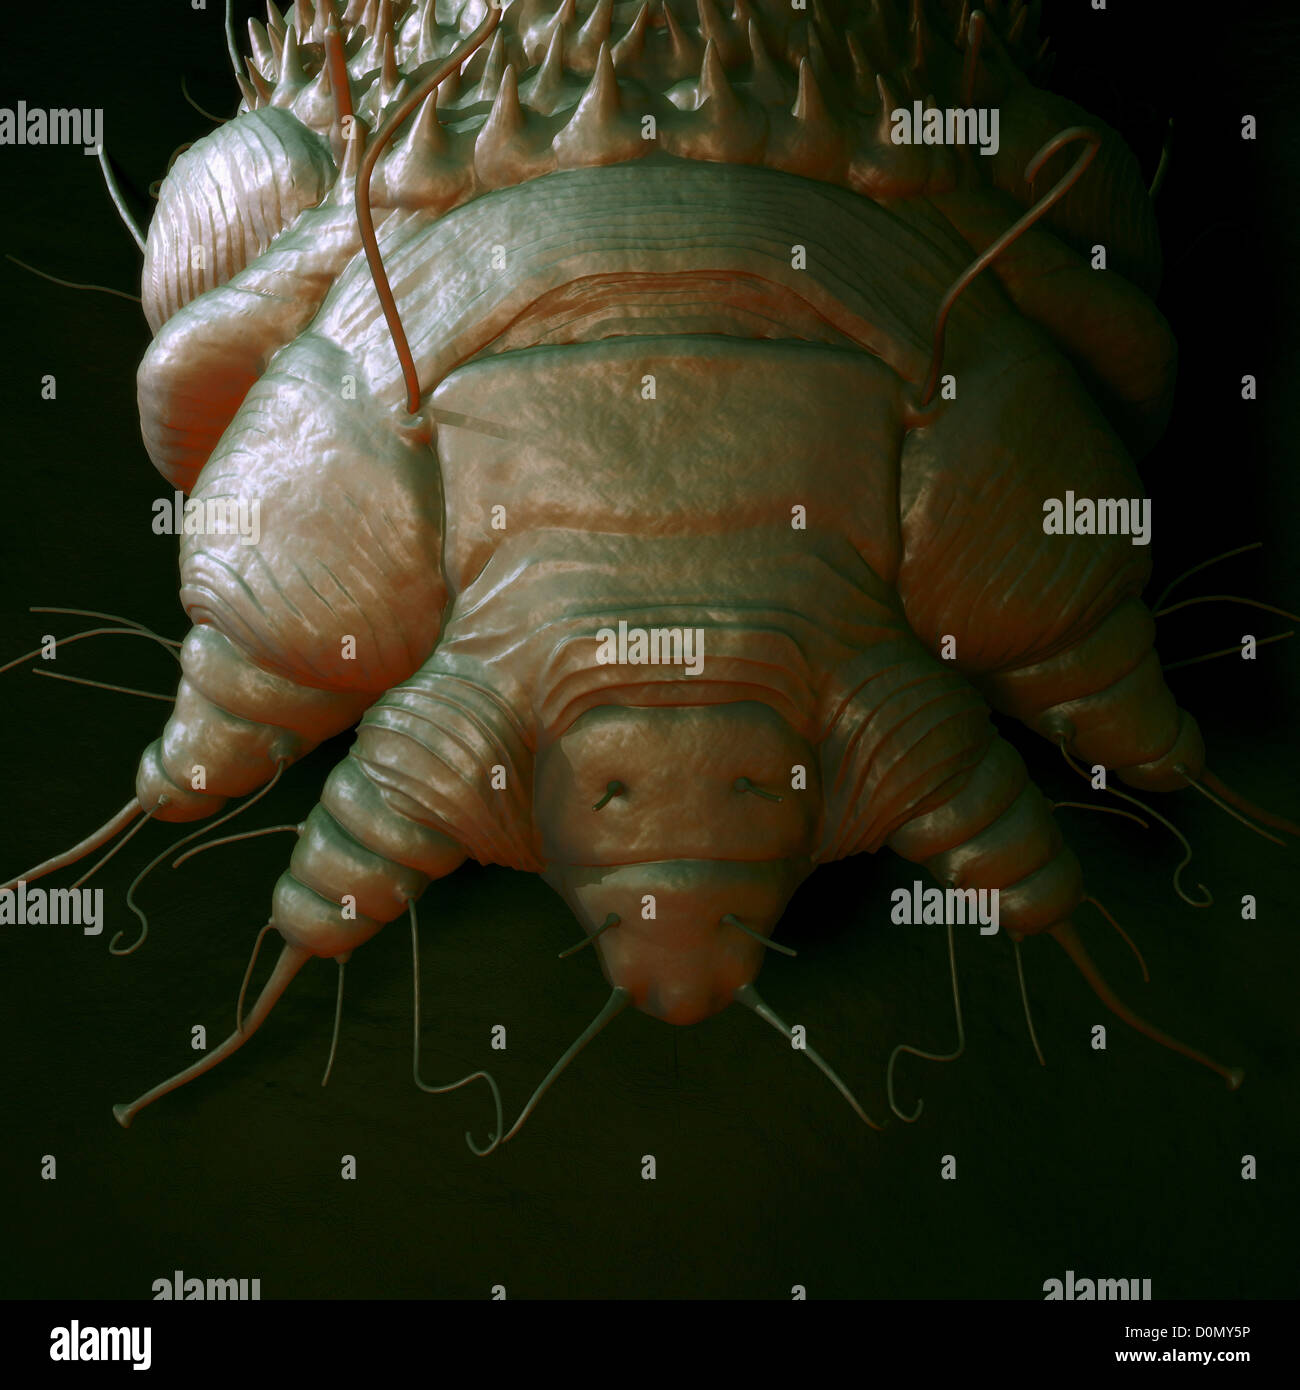 A Close Up View Of The Cause Of Scabies The Mite Sarcoptes Scabiei Stock Photo Alamy